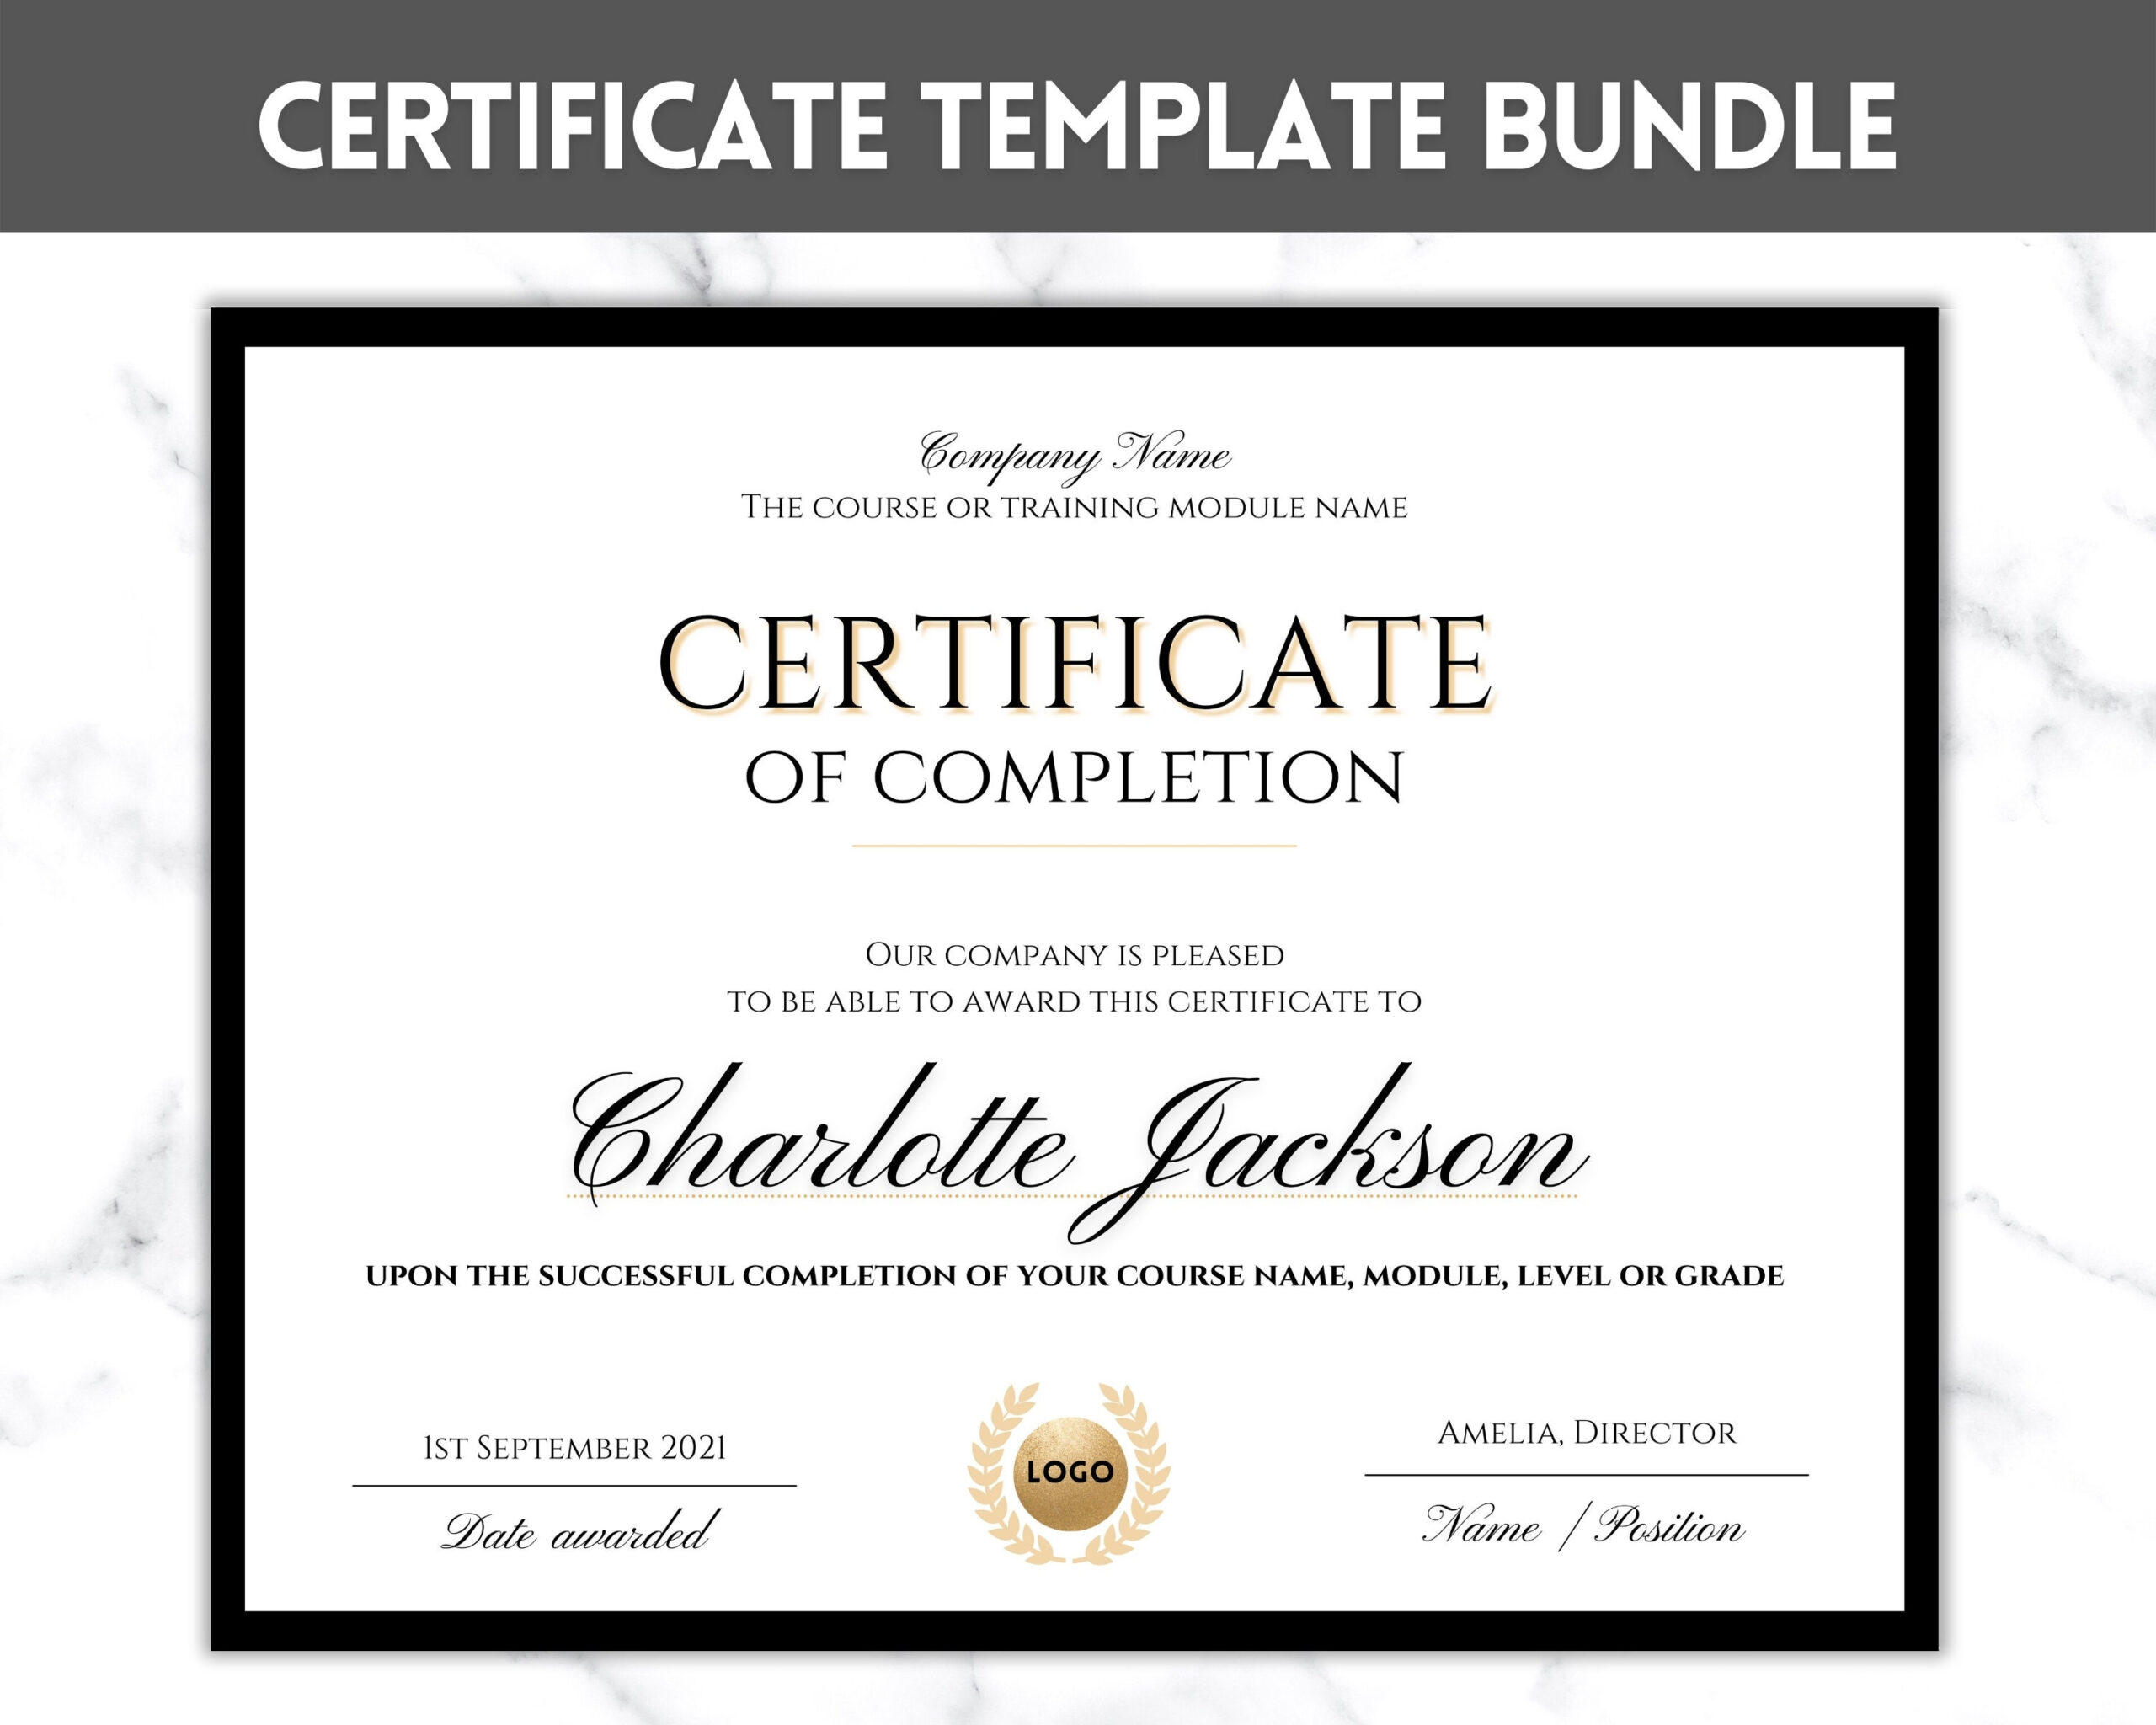 Editable Certificate Template Certificate of Completion - Etsy.de